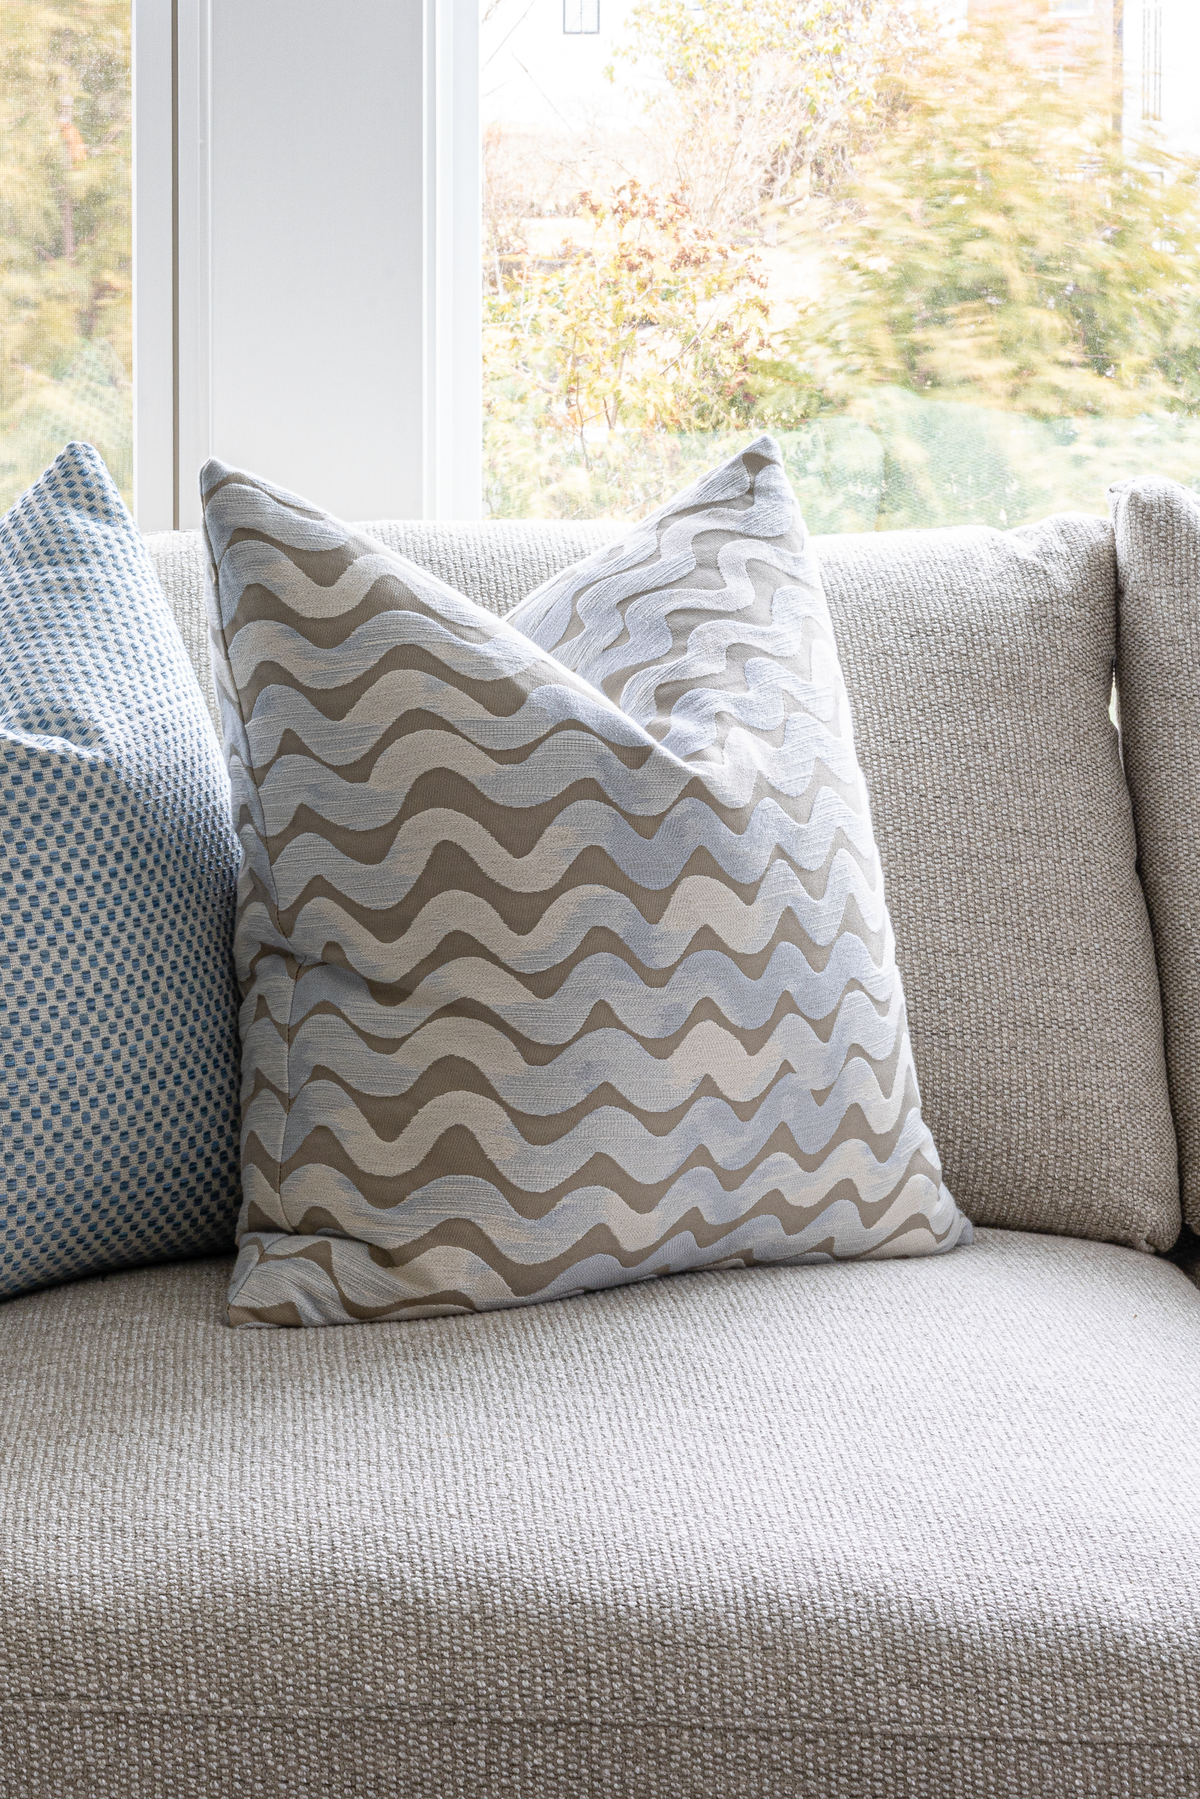 Tidal Wave in Taupe Pillow